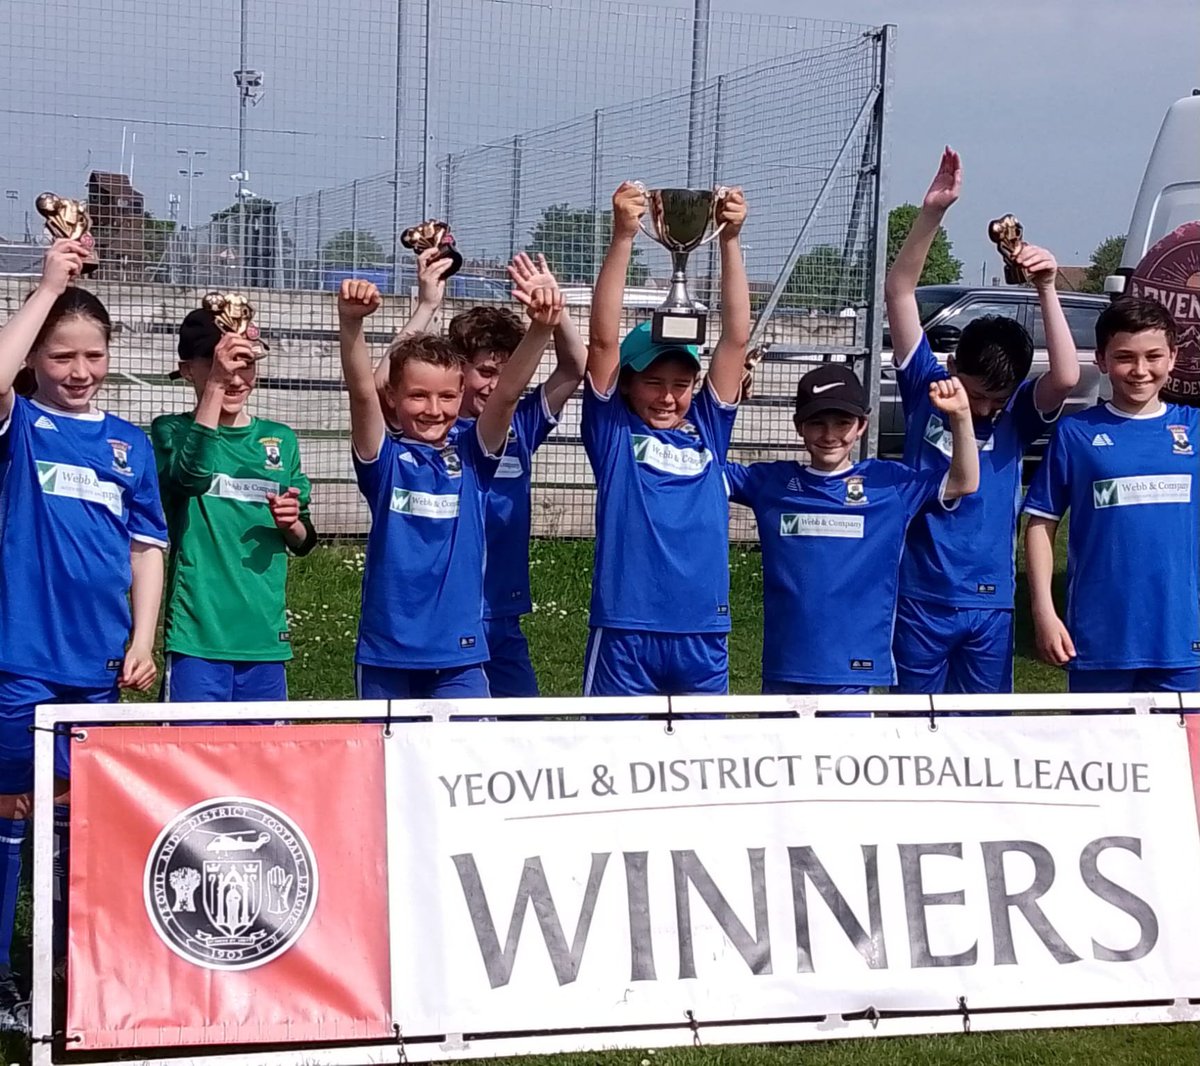 A busy week for @wellscityfc The @wellscityateam secured a treble with a 3-2 win over @ColefordAth1890, securing the Paulton Hospital Cup, @somersetfa junior Cup & County Prem Title. U12s won the Yeovil and District league U10 Warriors won 3-1 v East Coker. ⚽️💙 #upthewells